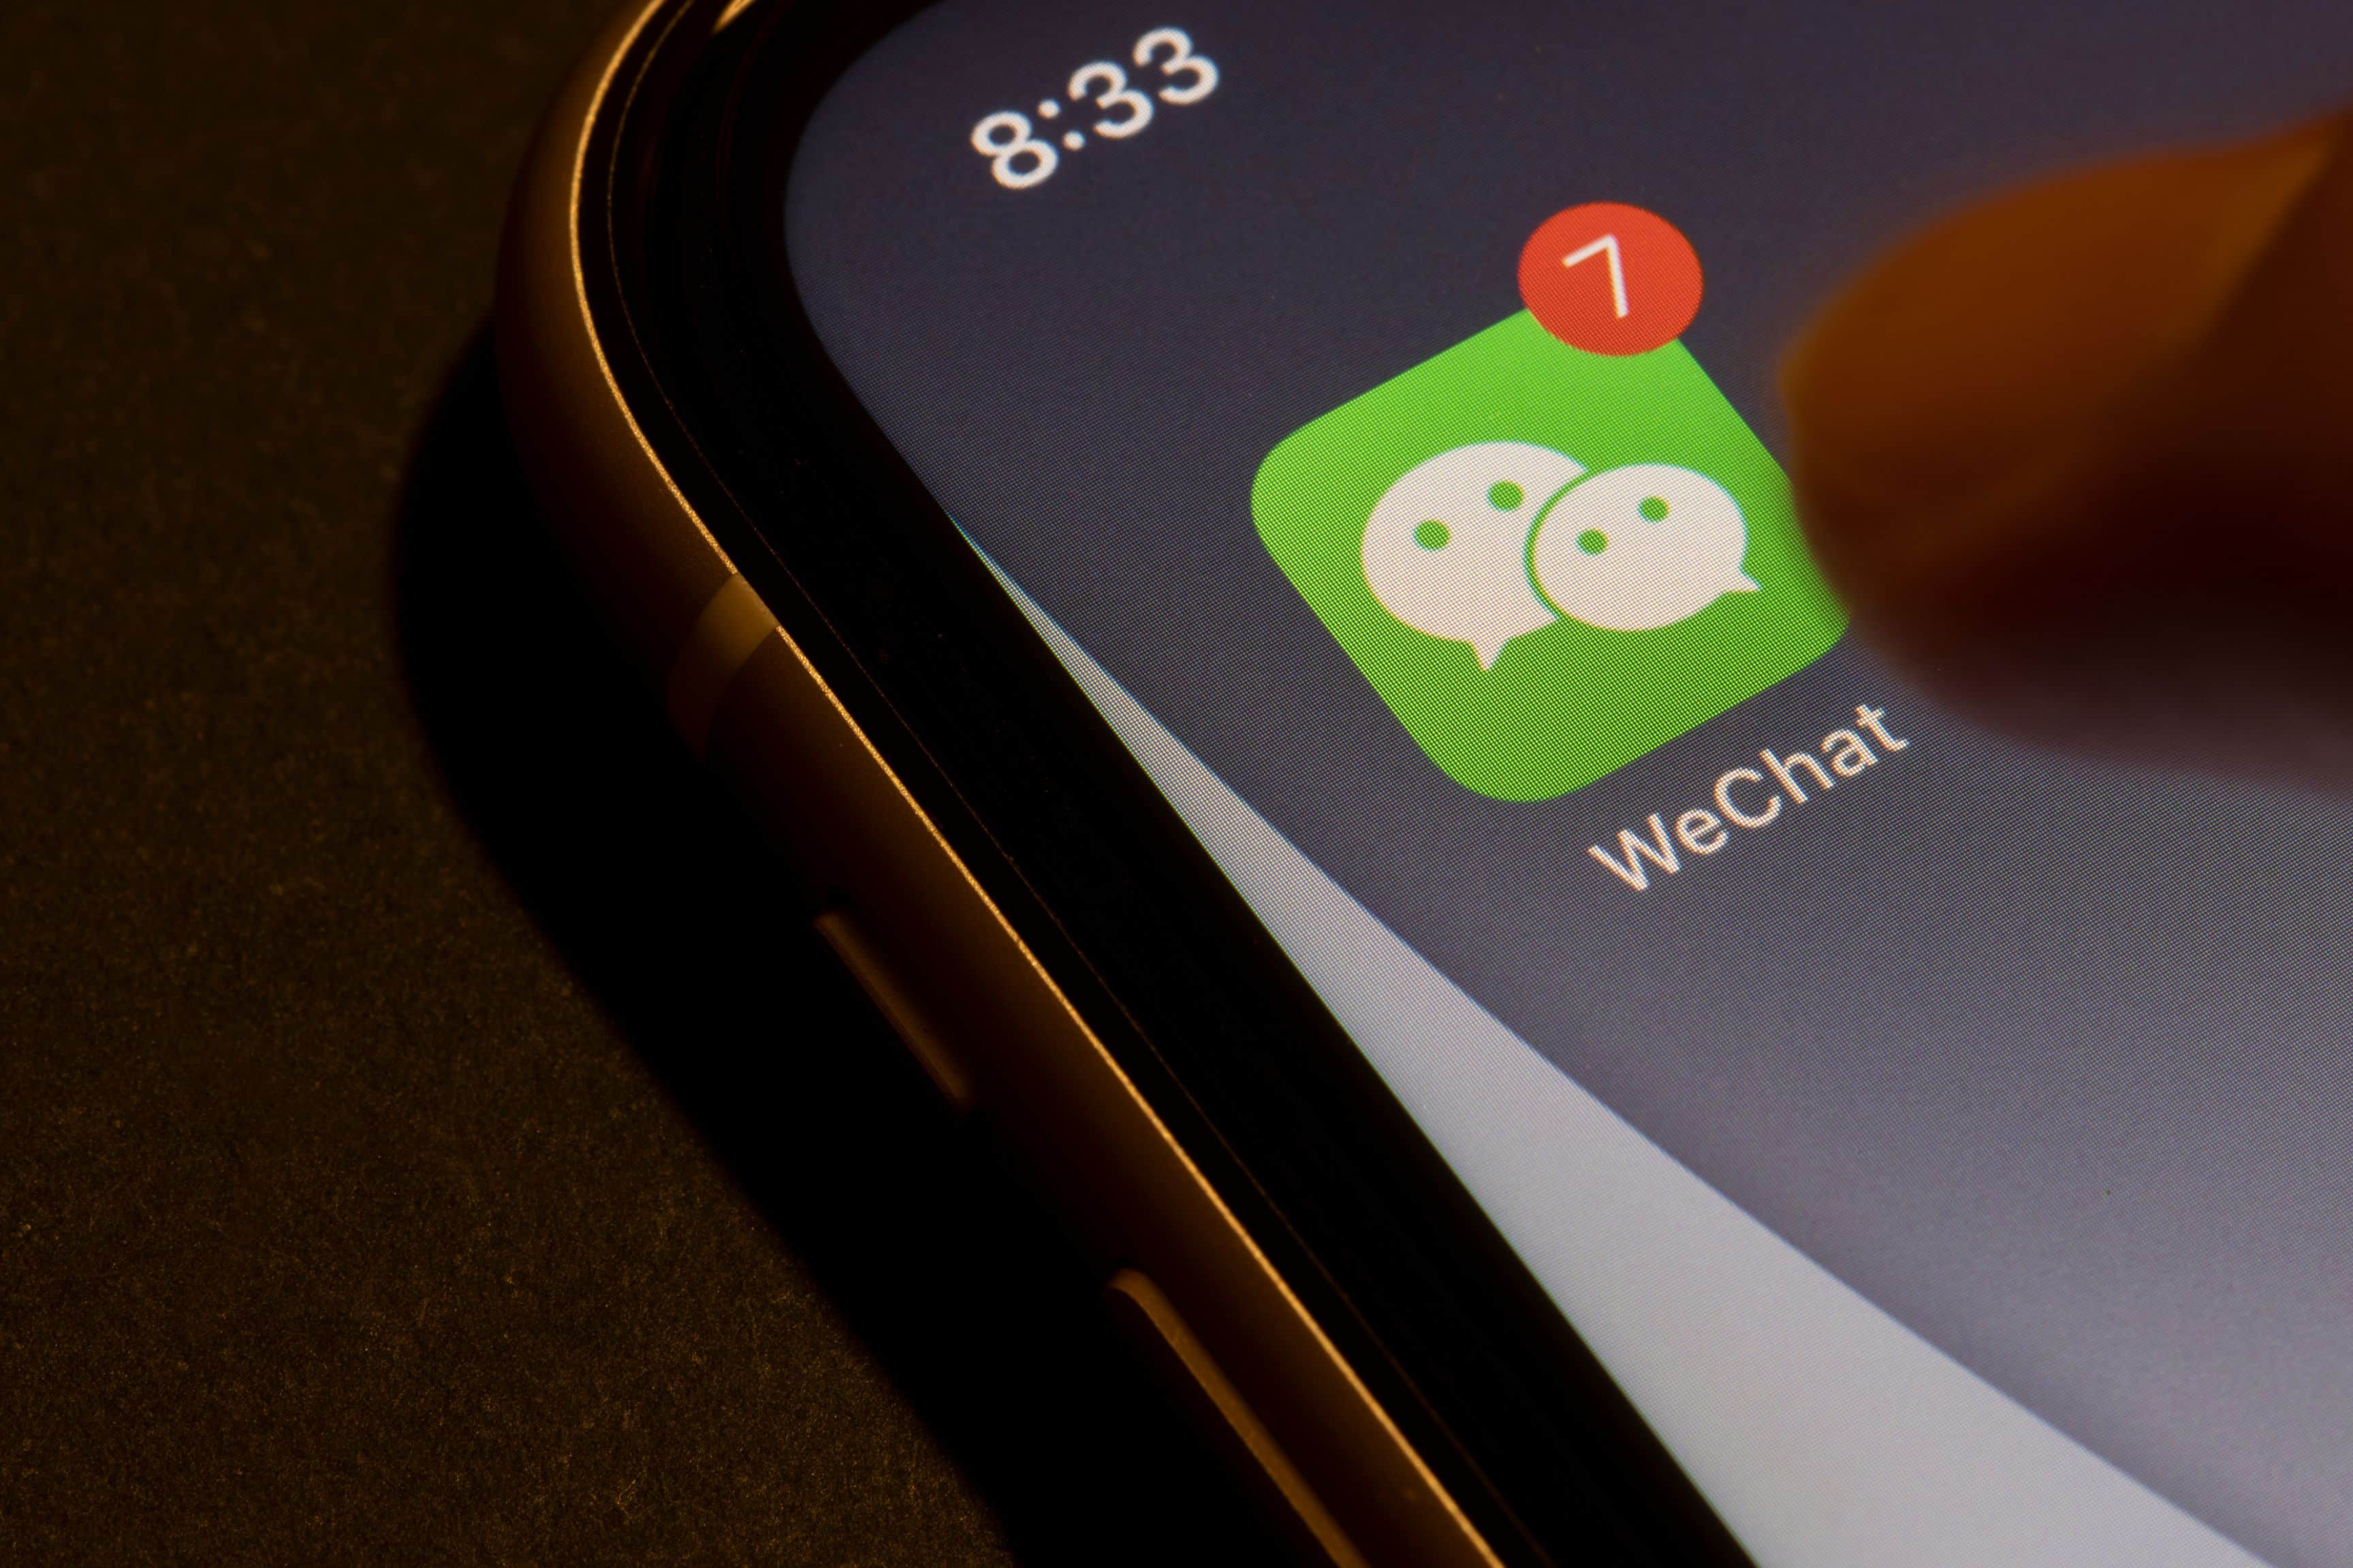 Portland, OR, USA - Aug 19, 2021: Finger touching WeChat app icon with unread message badge on an iPhone. Tencent's WeChat is a Chinese multi-purpose messaging, social media and mobile payment app.